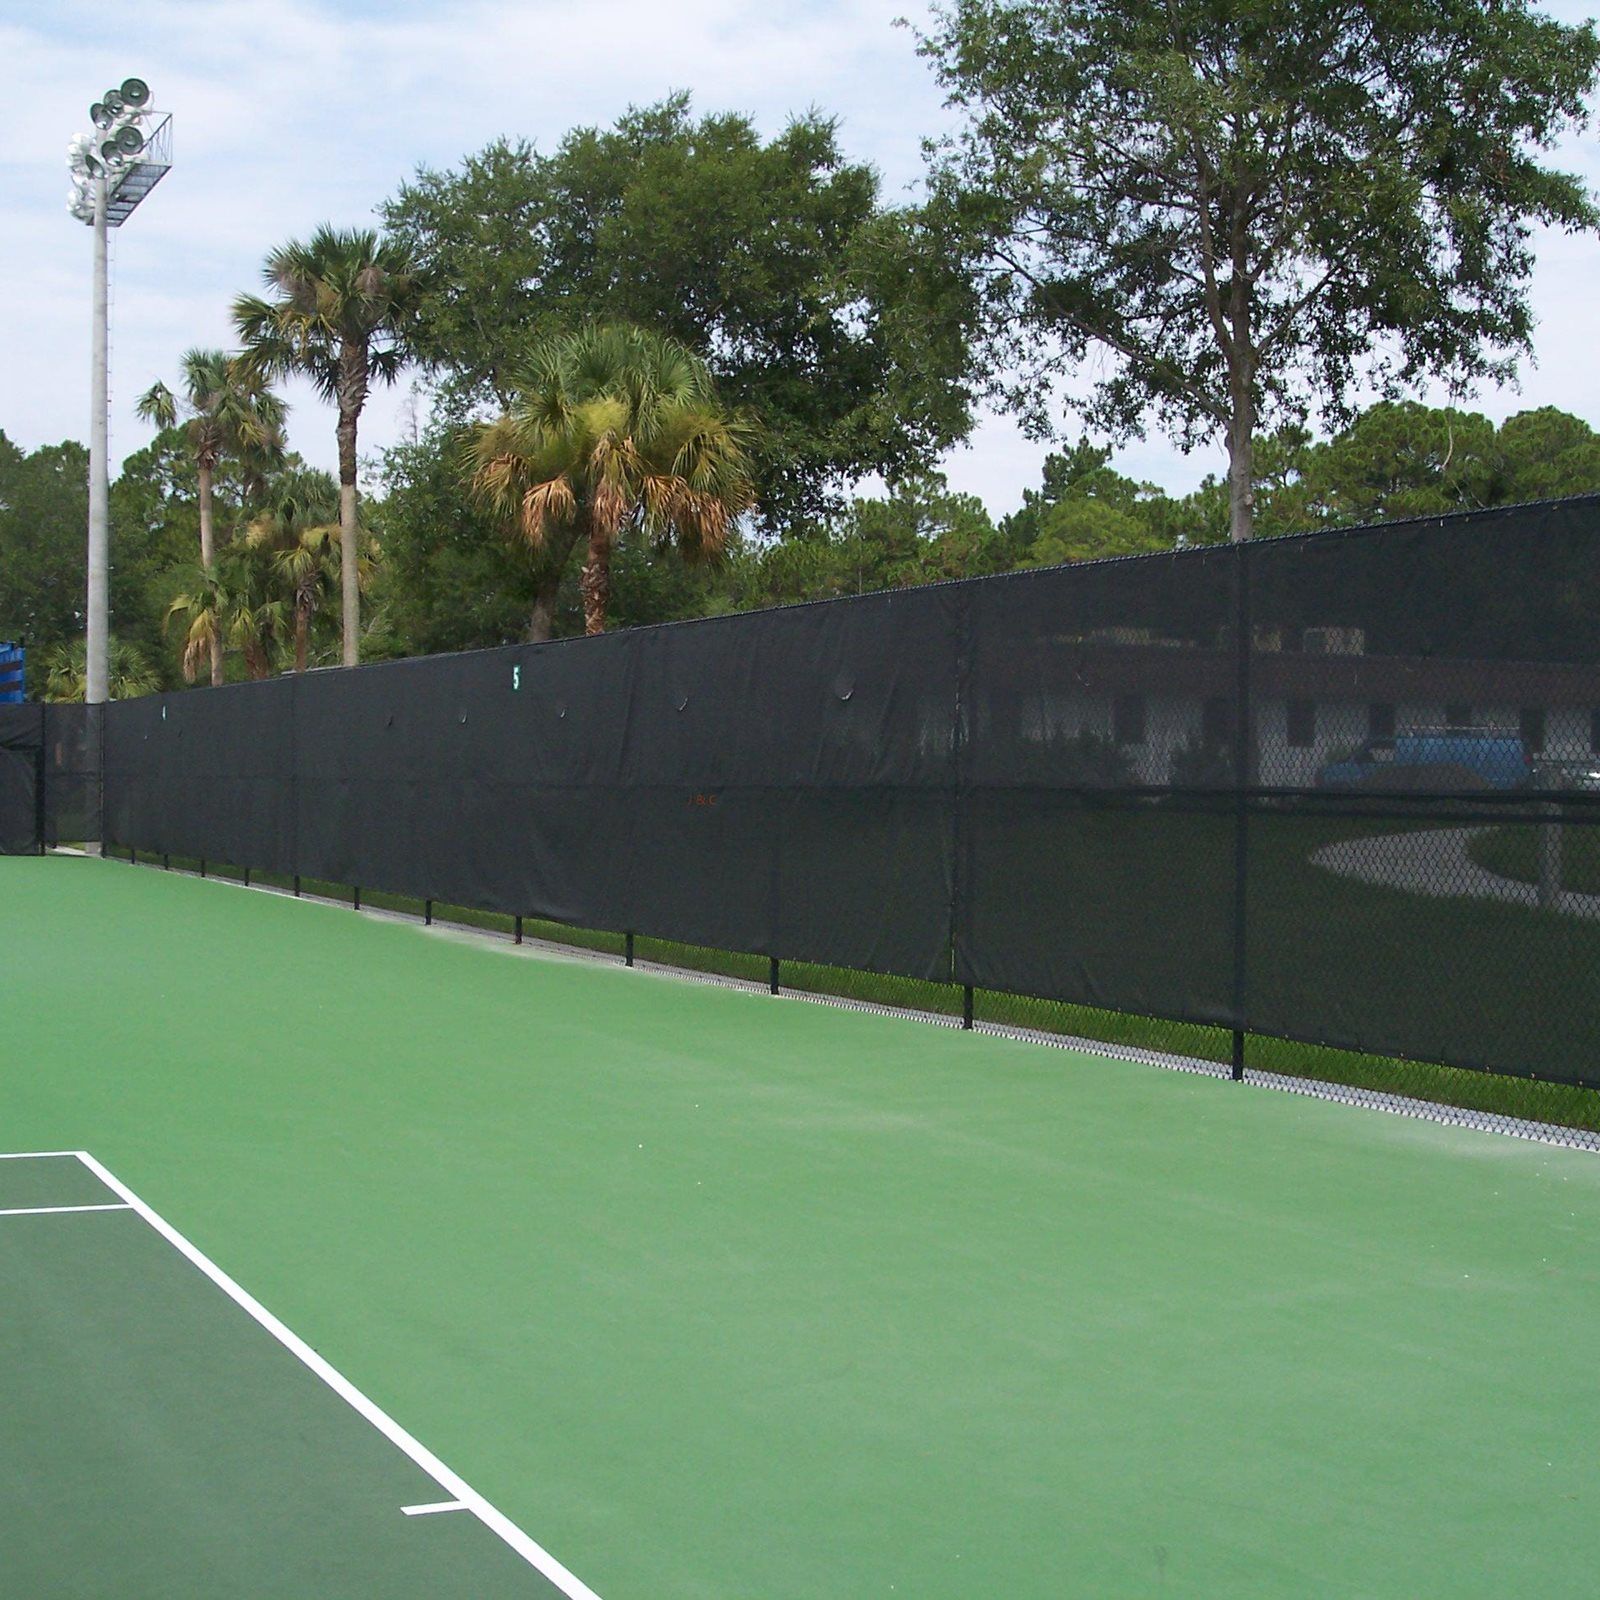 Privacy Screen-Wind Breaker-Barrier Shade Net-Perimeter Wall Privacy Fence-Privacy Nets for Basketball Courts, Tennis Courts, Volleyball Courts-Privacy Screen fence for Playgrounds